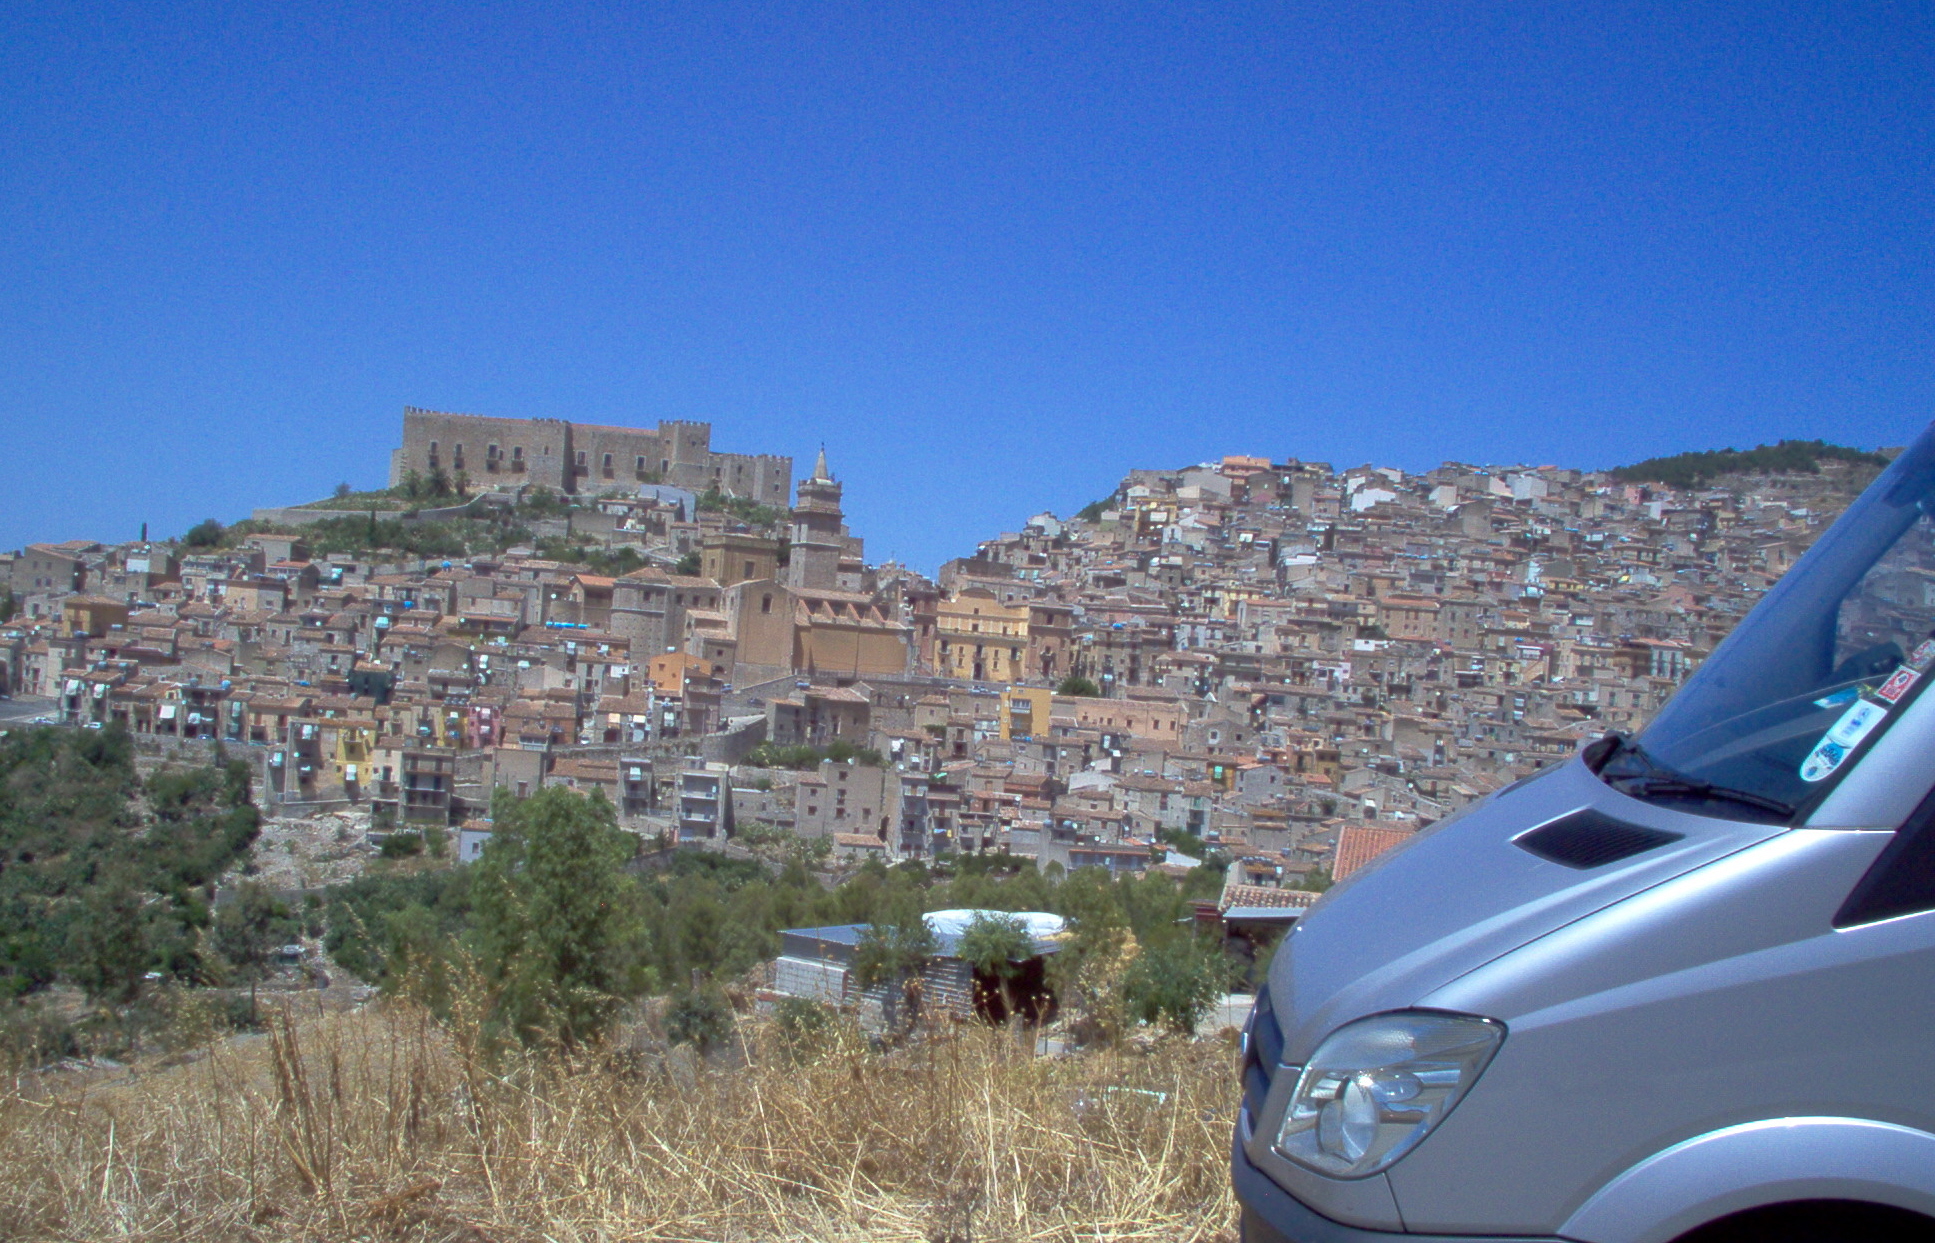 Removals to Sicily